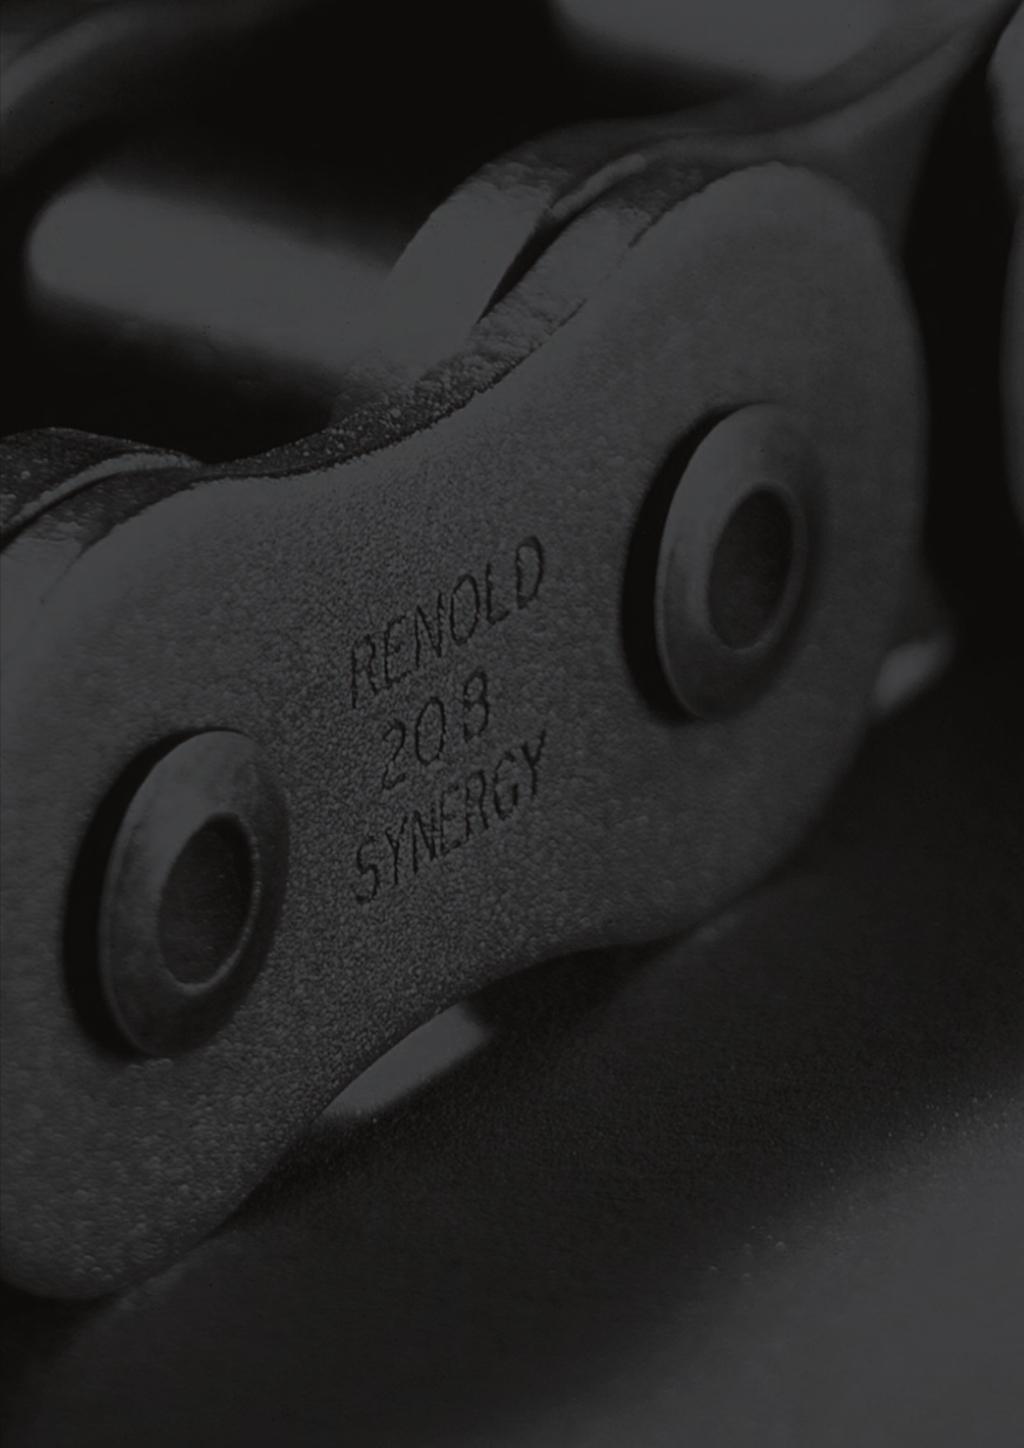 Renold Synergy Chain I 5 Renold Synergy Successes Don t just take our word for it. See how Renold Synergy is improving the performance of businesses of every kind round the world.